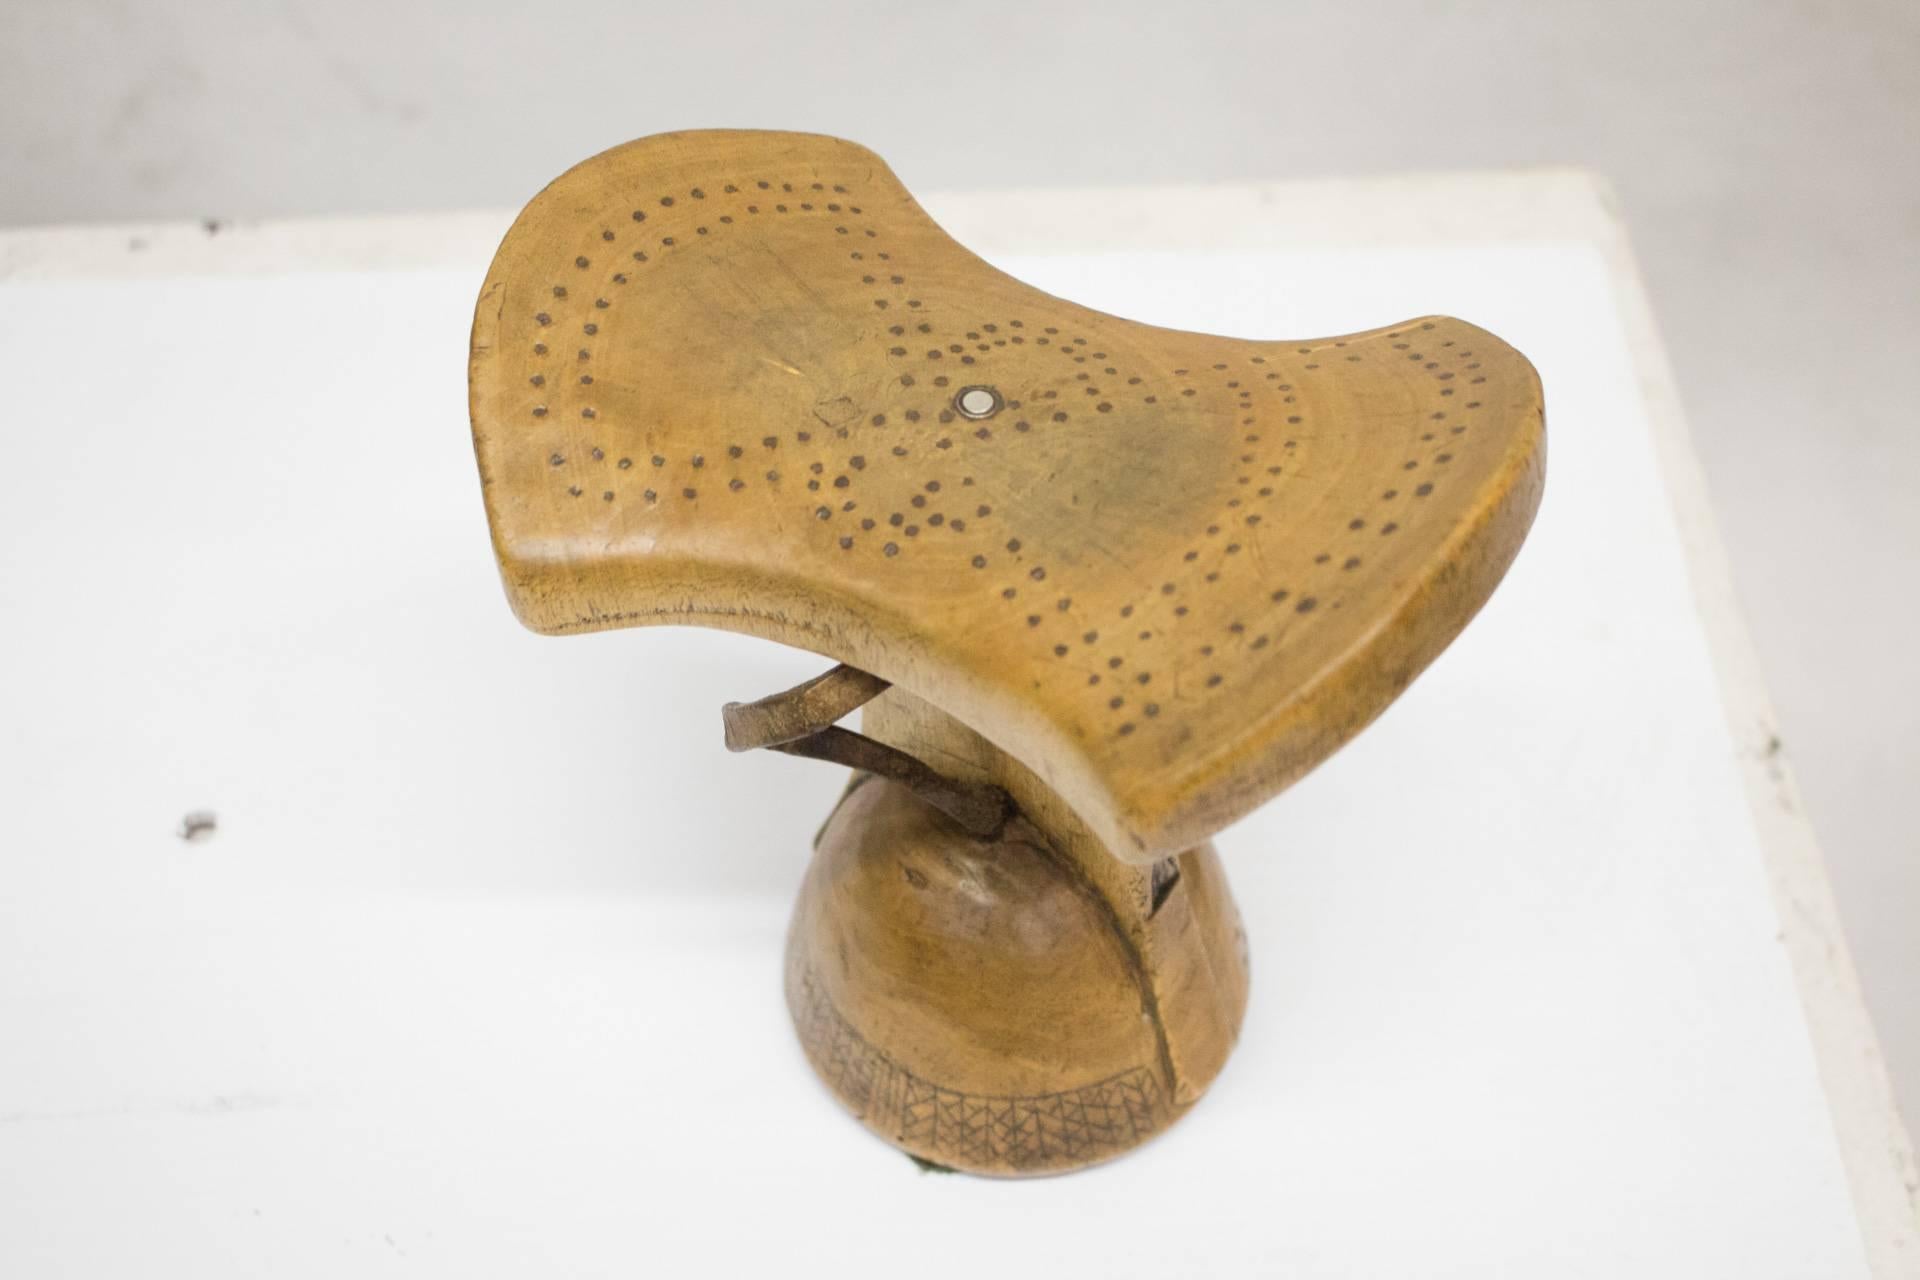 An authentic African headrest from Ethiopia. These traditional pieces with incised decorative lines and rich patina are from the Sidamo people in Ethiopia. 
The headrests were usually carved from a single piece of fine-grained wood.